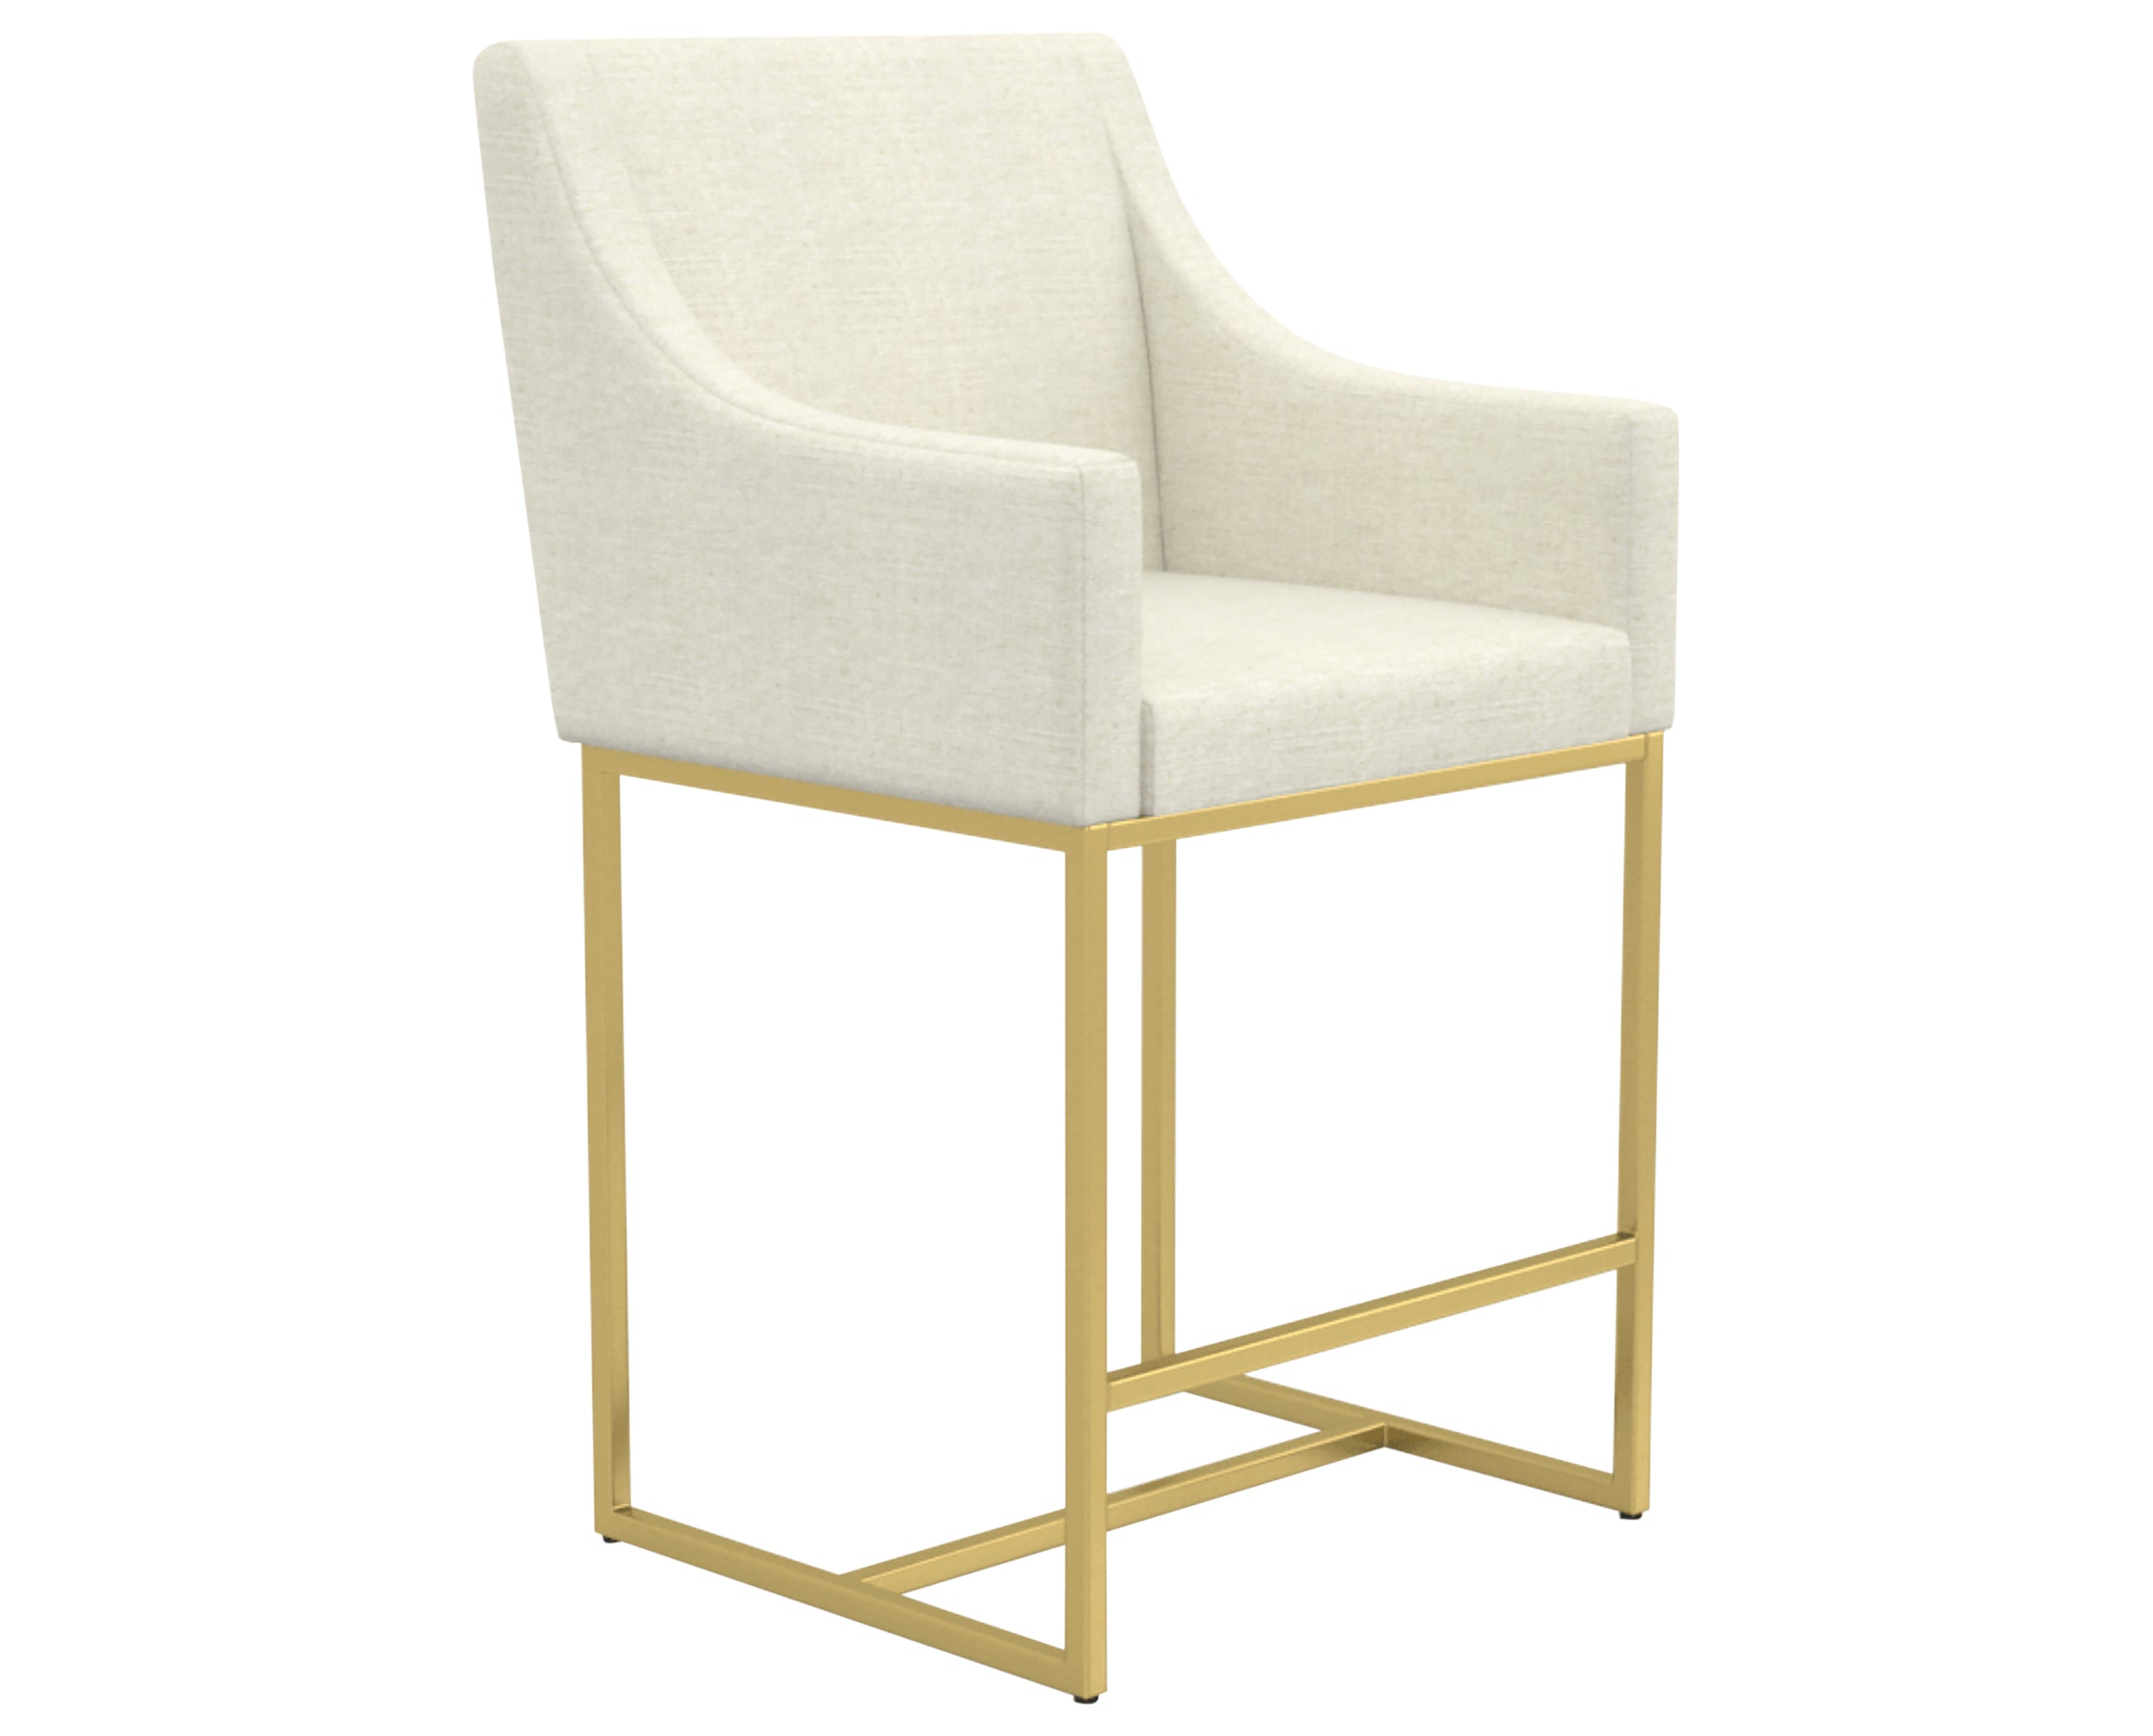 GL Metal Gold &amp; Fabric TW | Canadel Modern Counter Stool 8175 | Valley Ridge Furniture